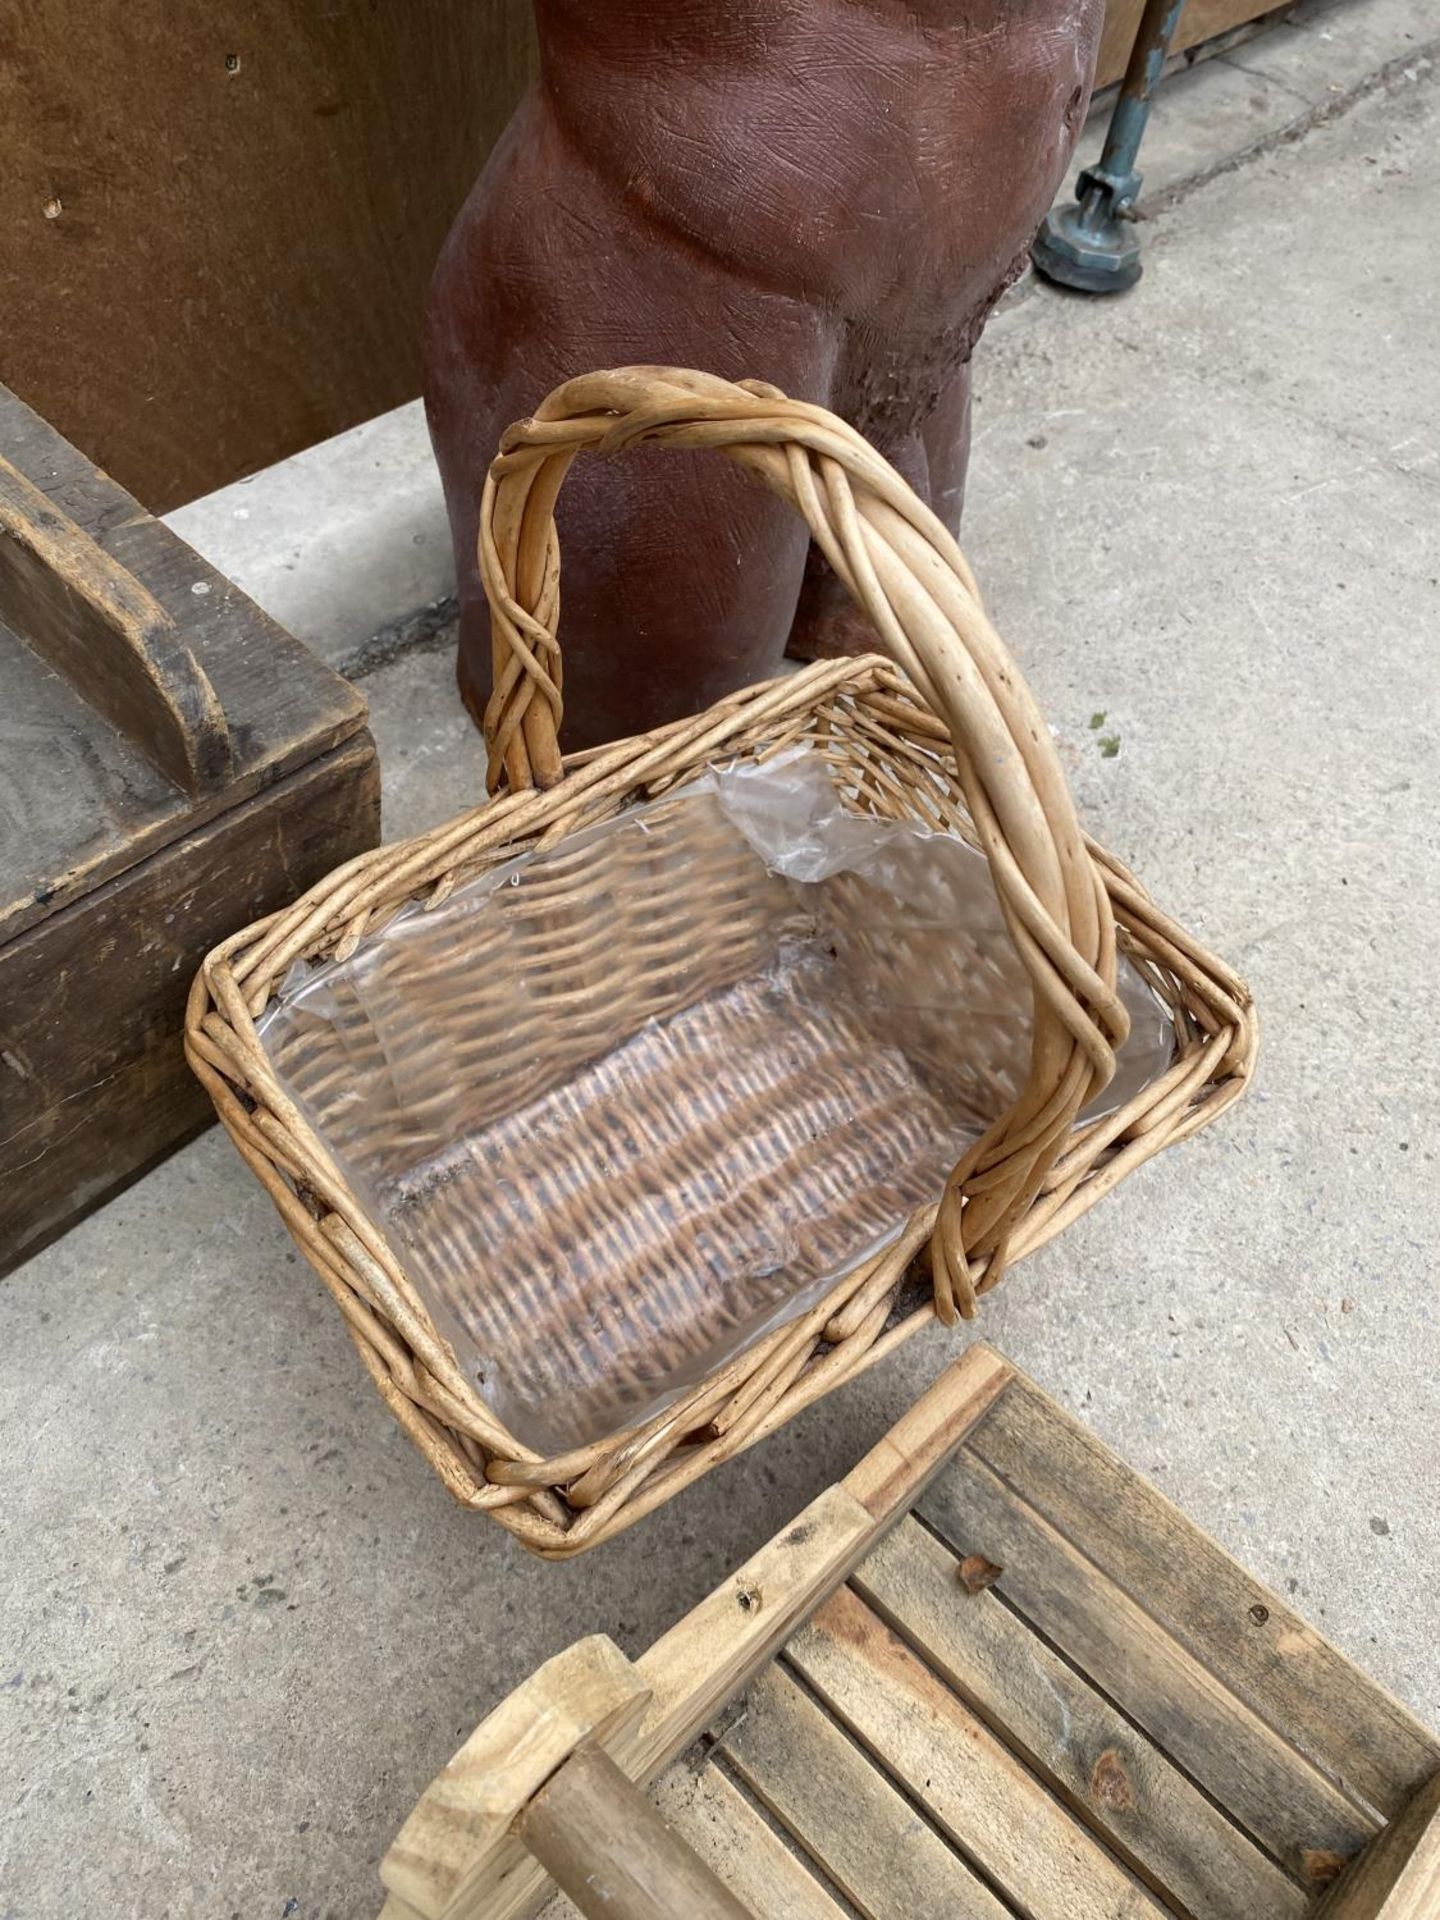 A VINTAGE WOODEN TOOL CHEST, A WICKER BASKET AND A WOODEN BASKET - Image 2 of 3